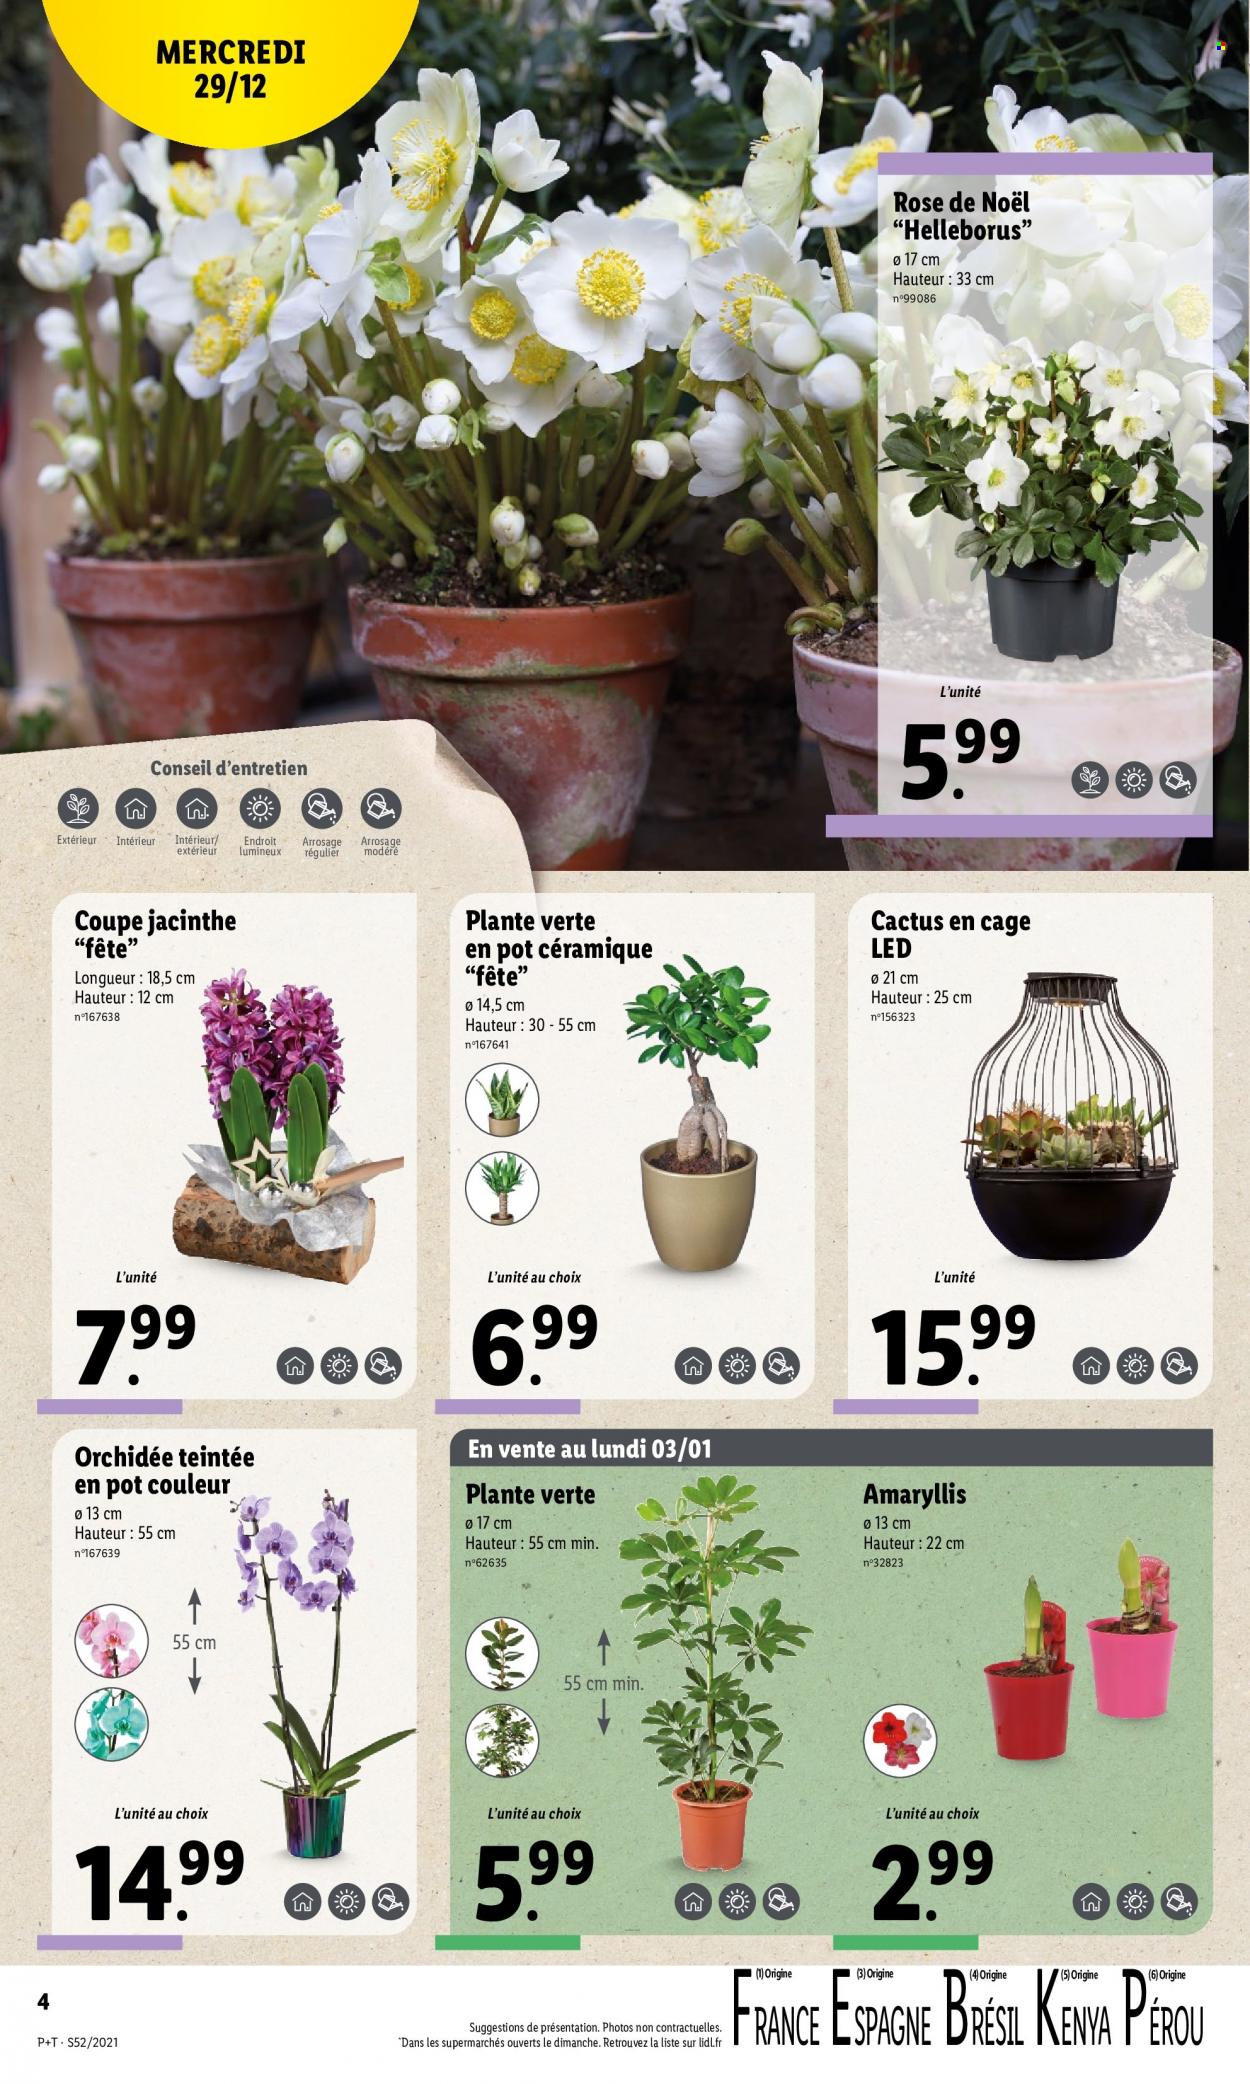 Catalogue Lidl - 29.12.2021 - 04.01.2022. Page 4.